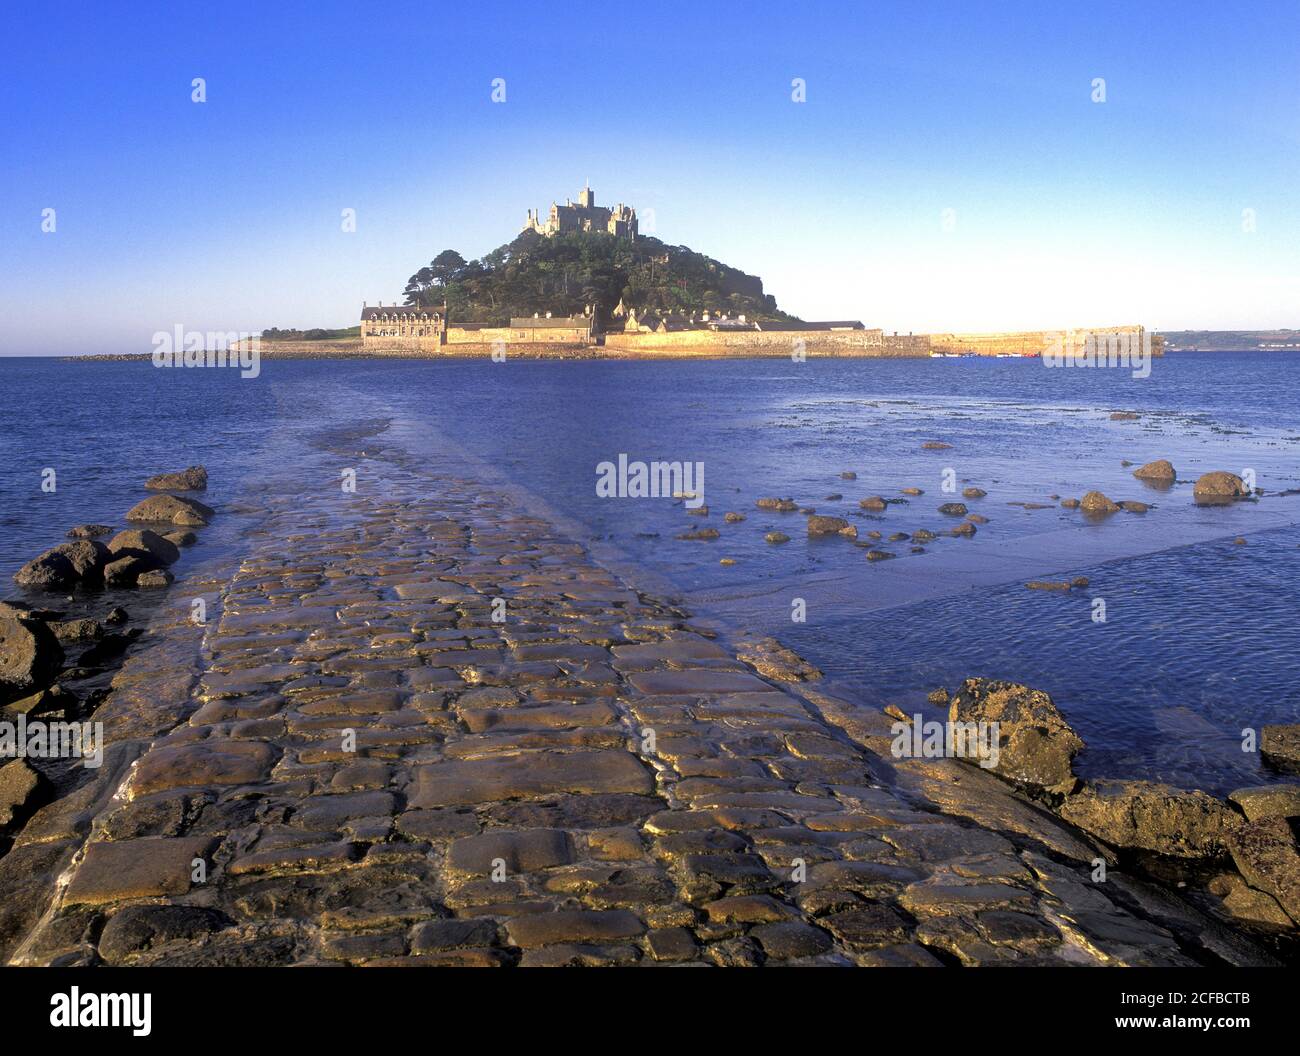 St Michaels Mount castle on a tidal island linked to mainland by man made causeway of granite setts visible at low tide Marazion Cornwall England UK Stock Photo